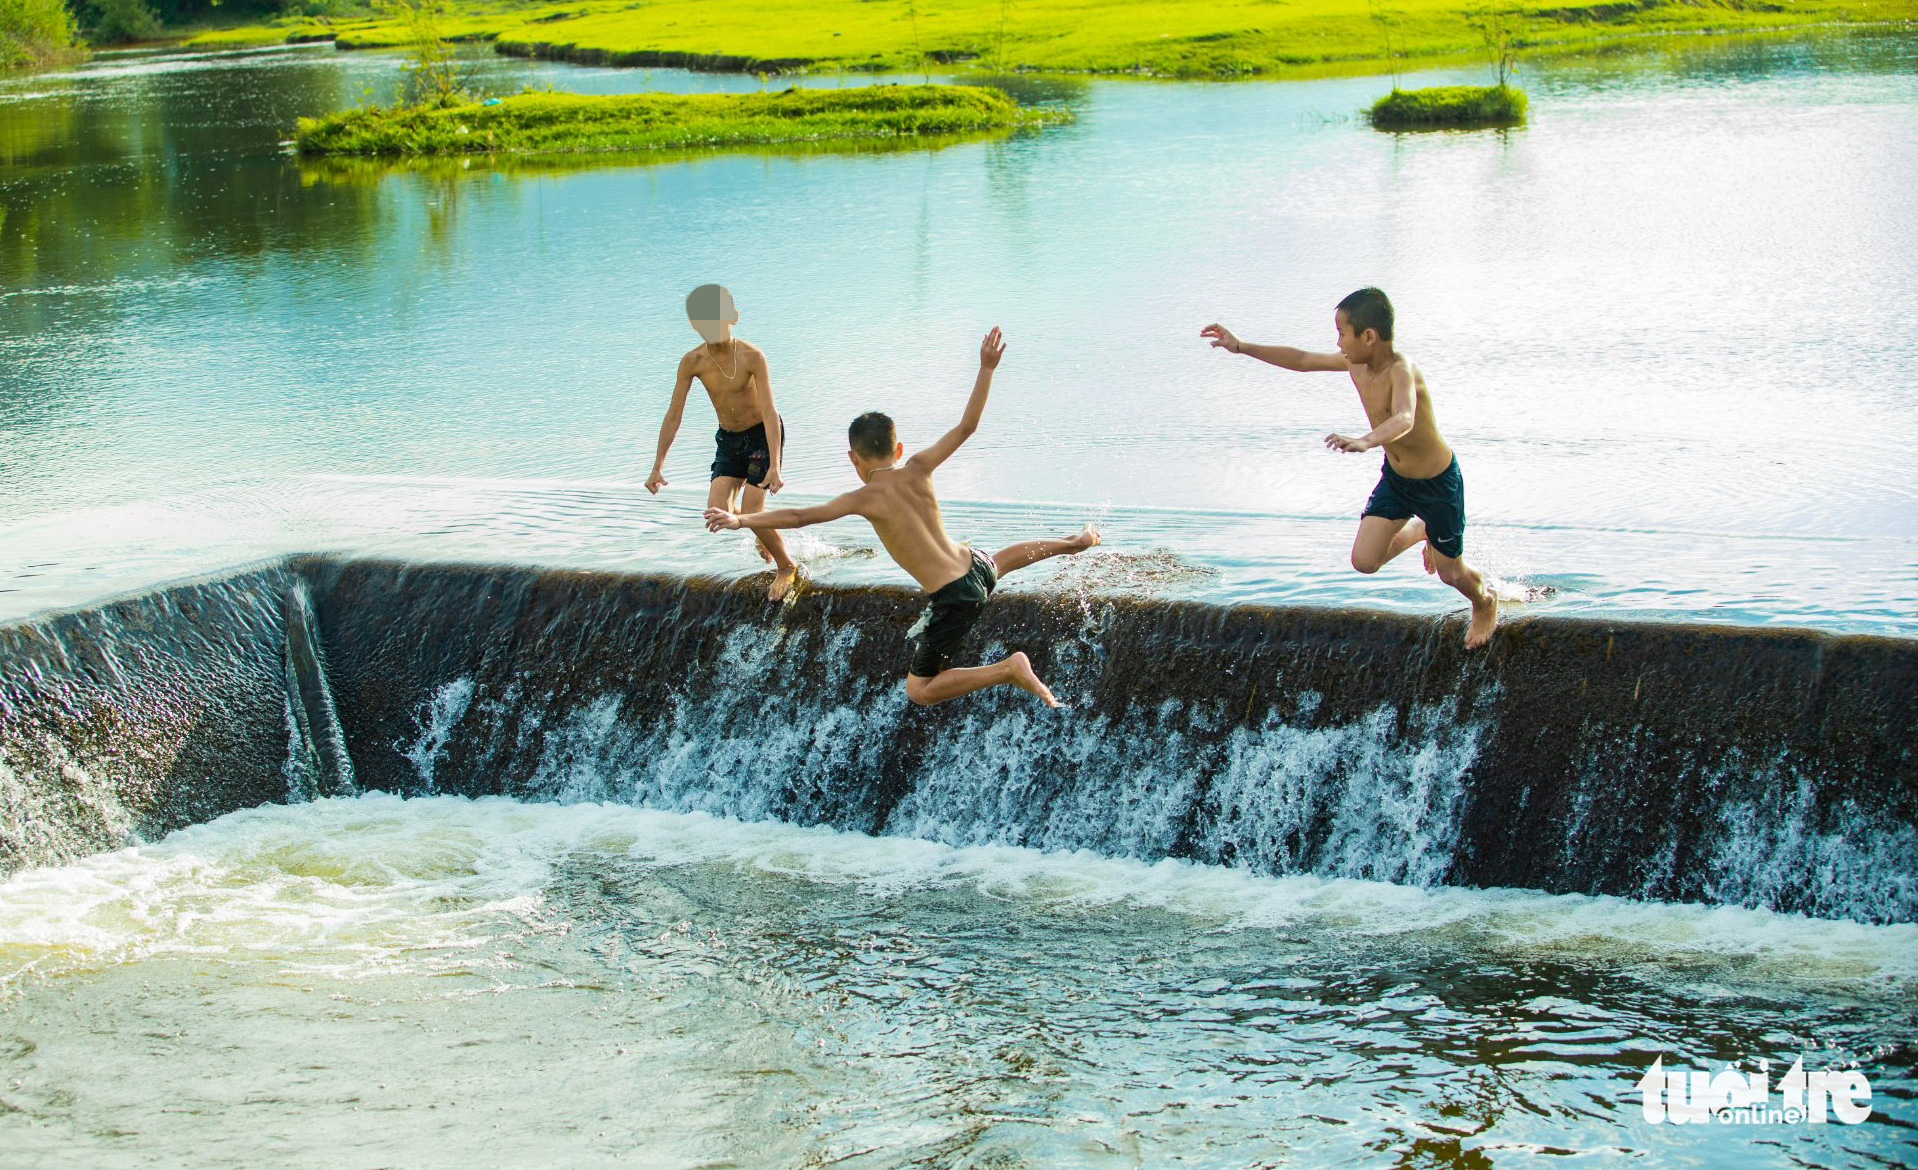 Only over 3% of children can swim in Vietnam’s Nghe An Province